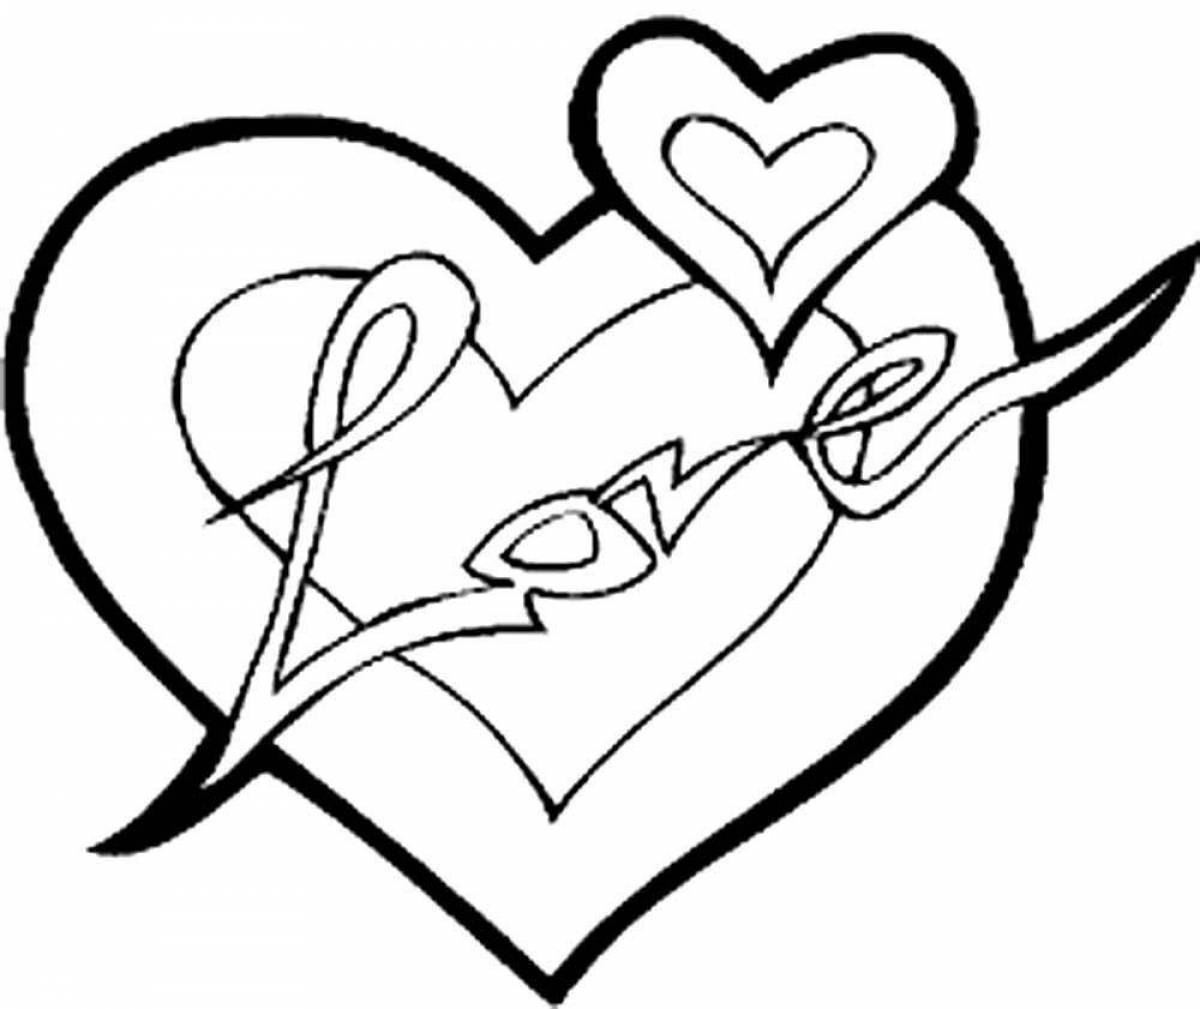 Exquisite heart coloring picture